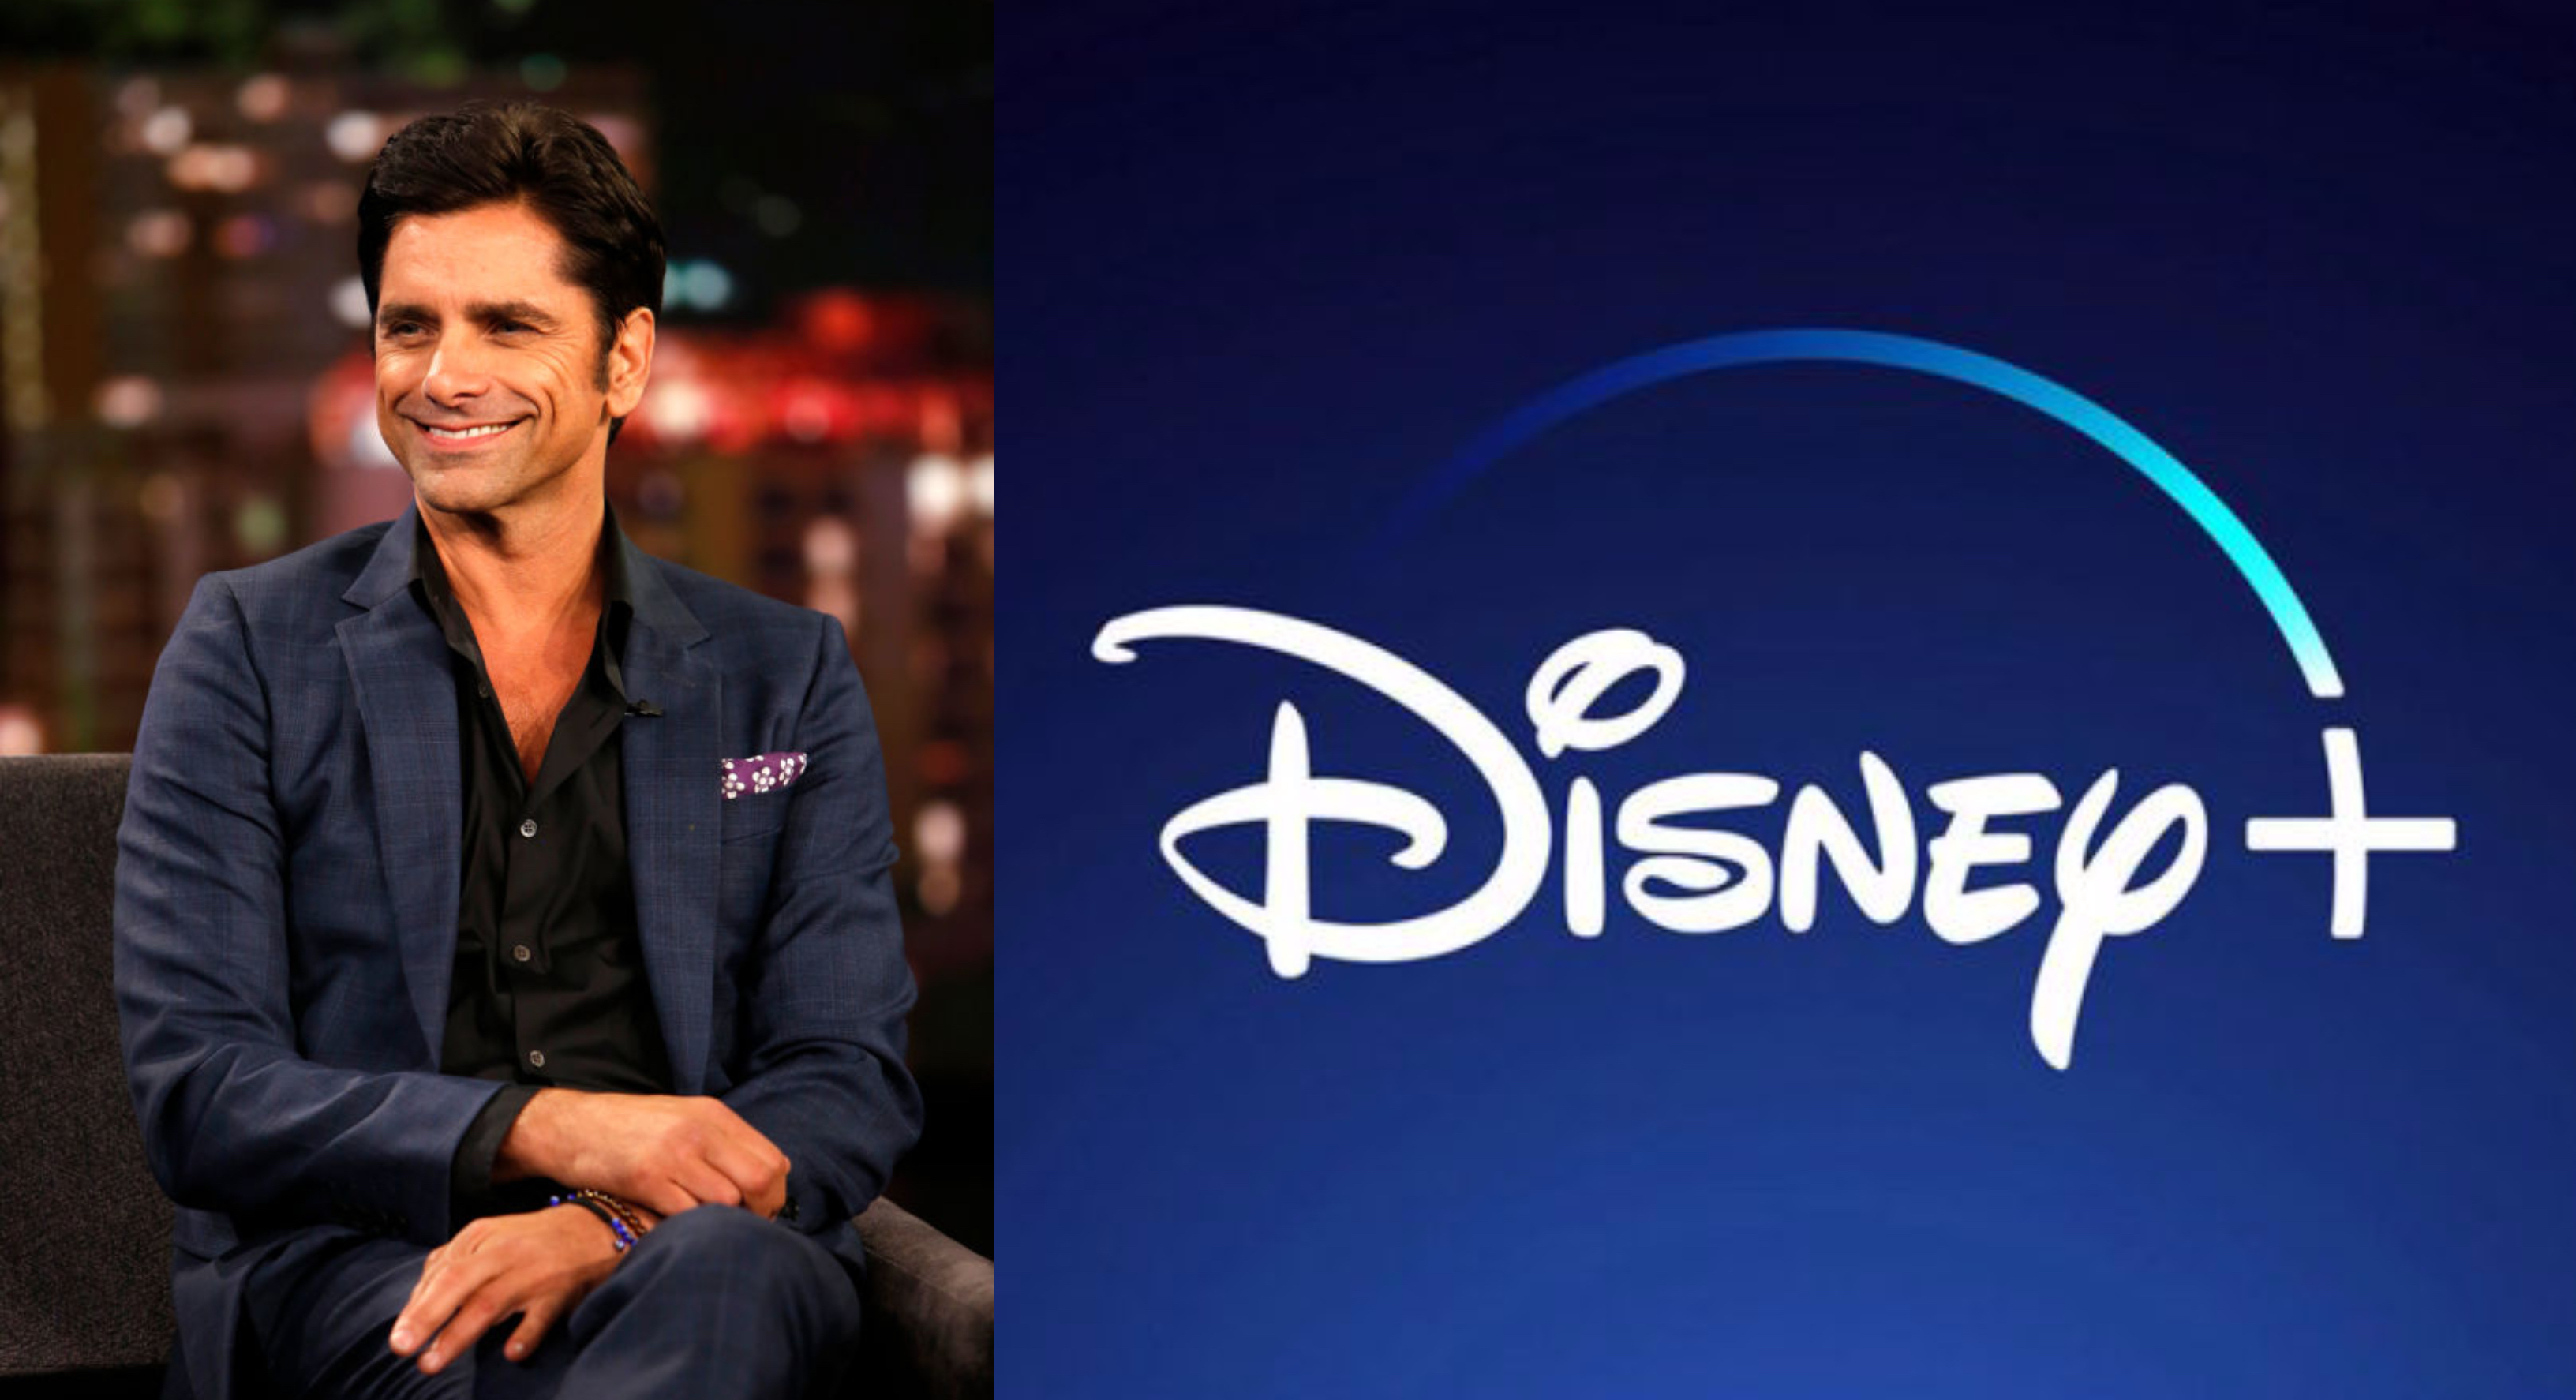 John Stamos Cast in ‘Big Shot’ a New Series Coming Soon to Disney+